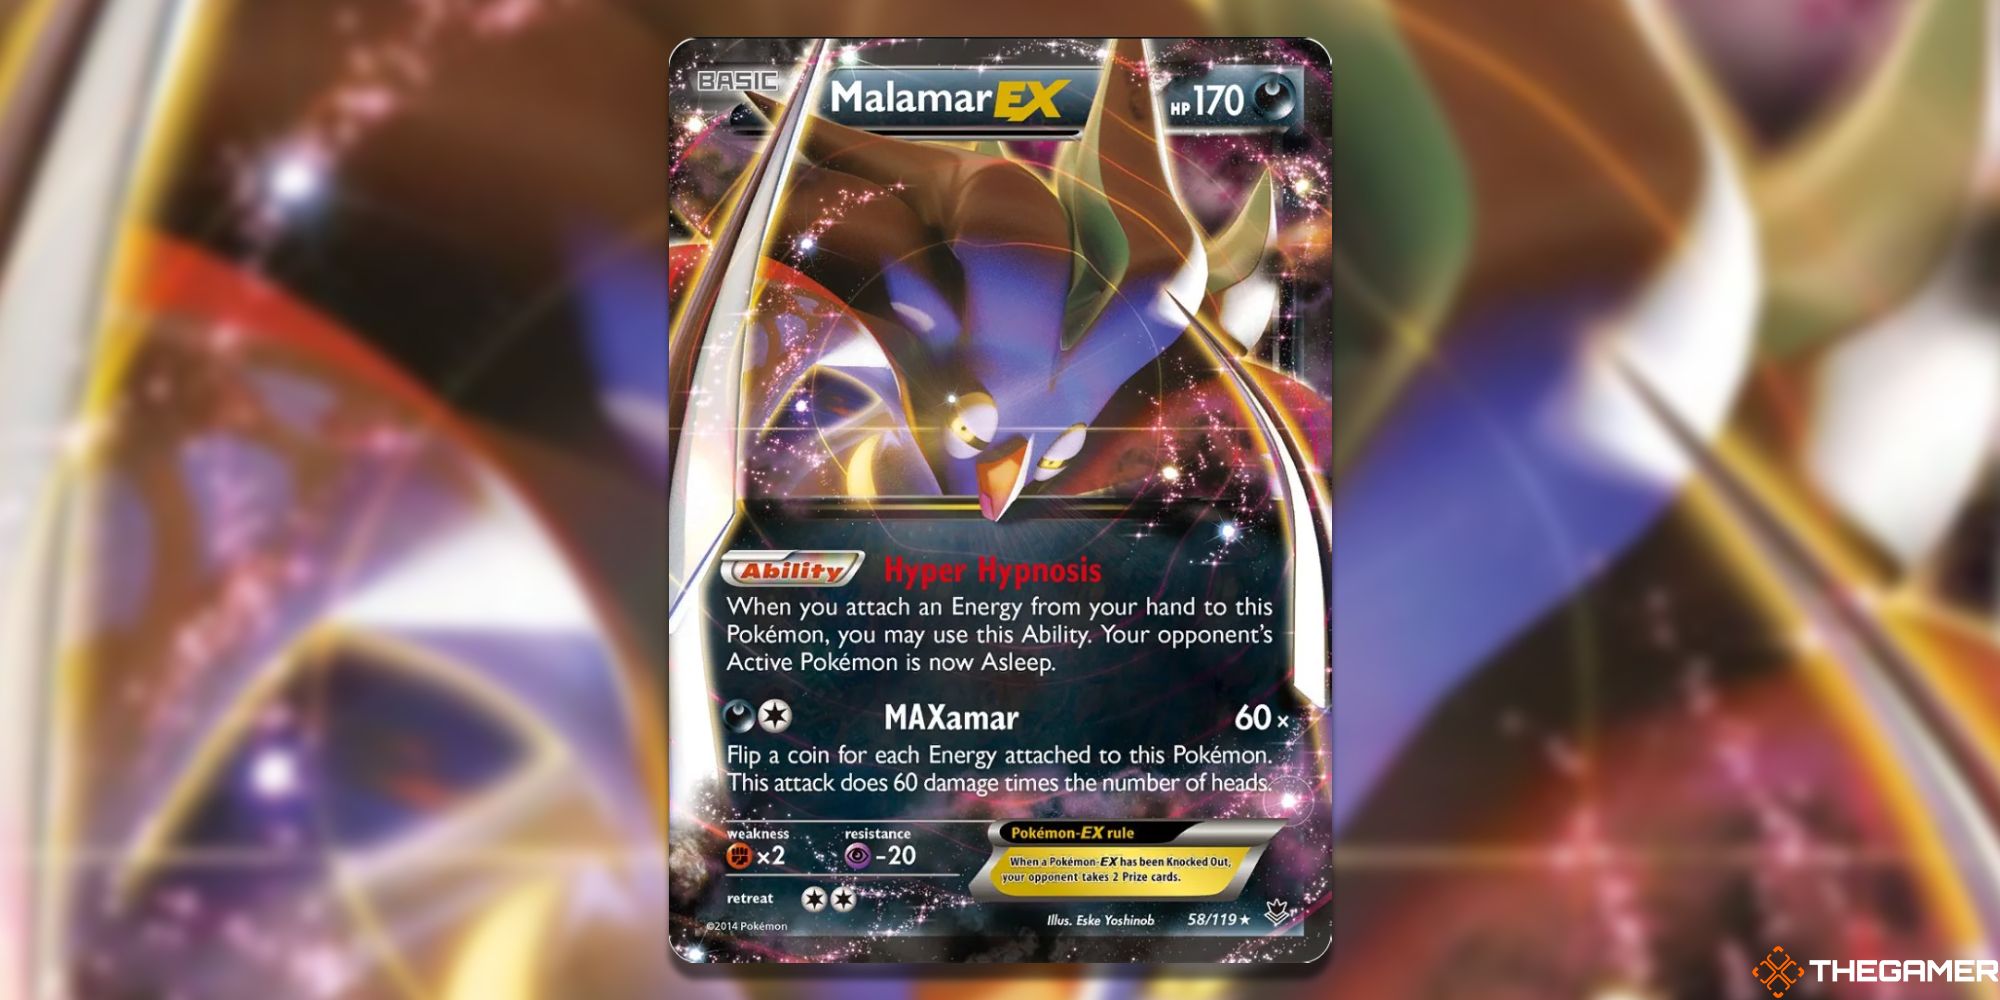 Malamar-EX from Phantom Forces Card Art with blurred background